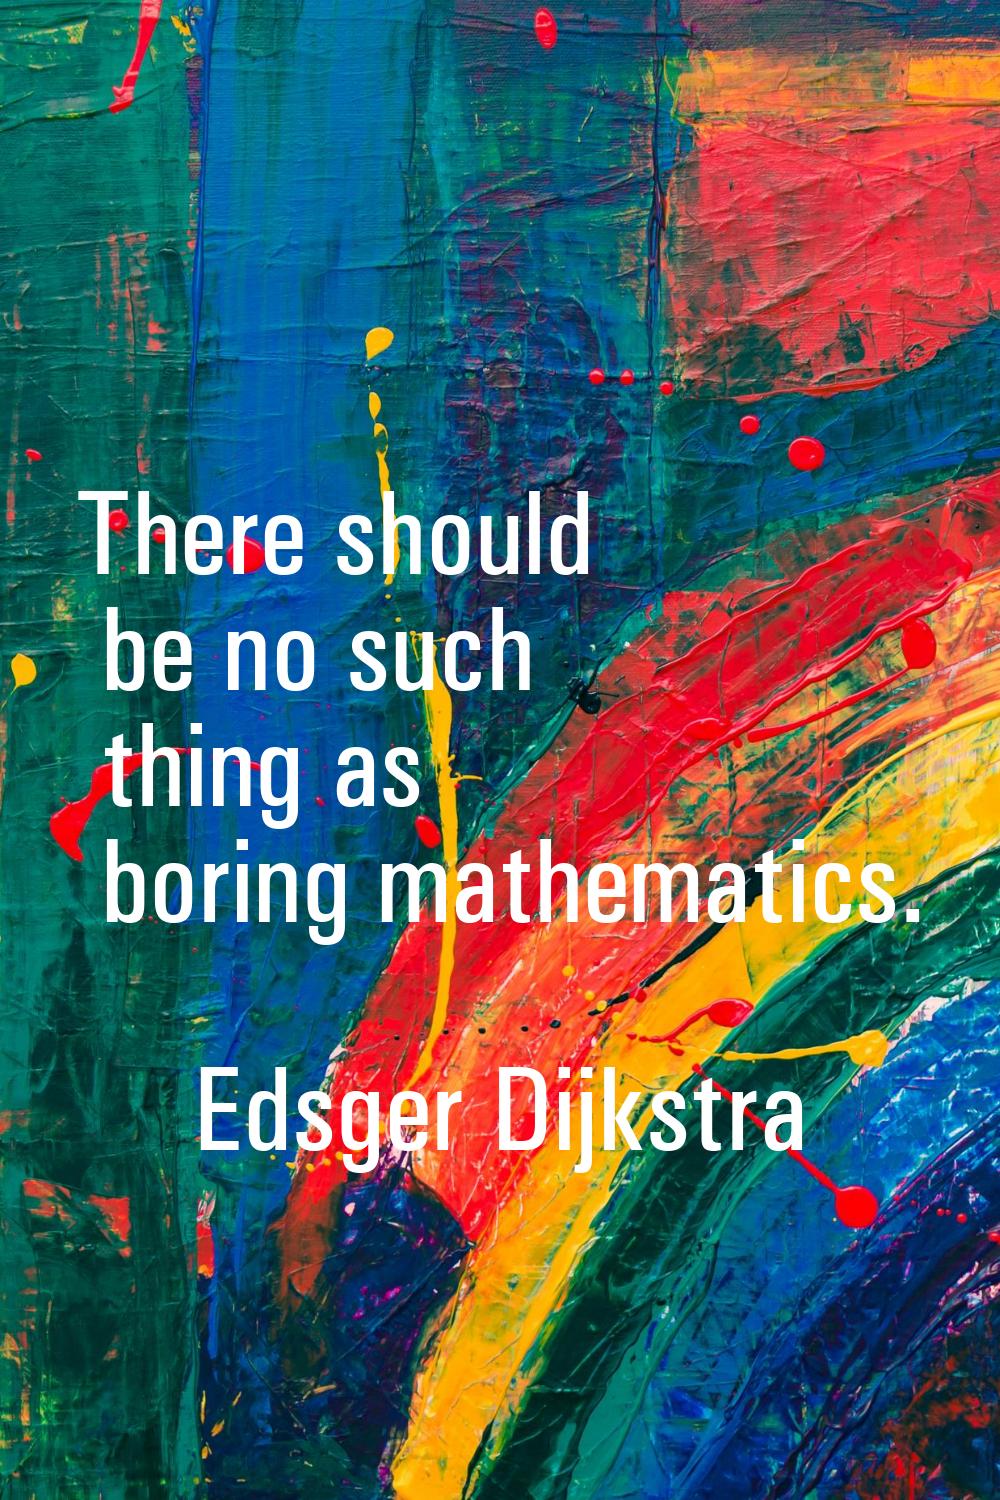 There should be no such thing as boring mathematics.